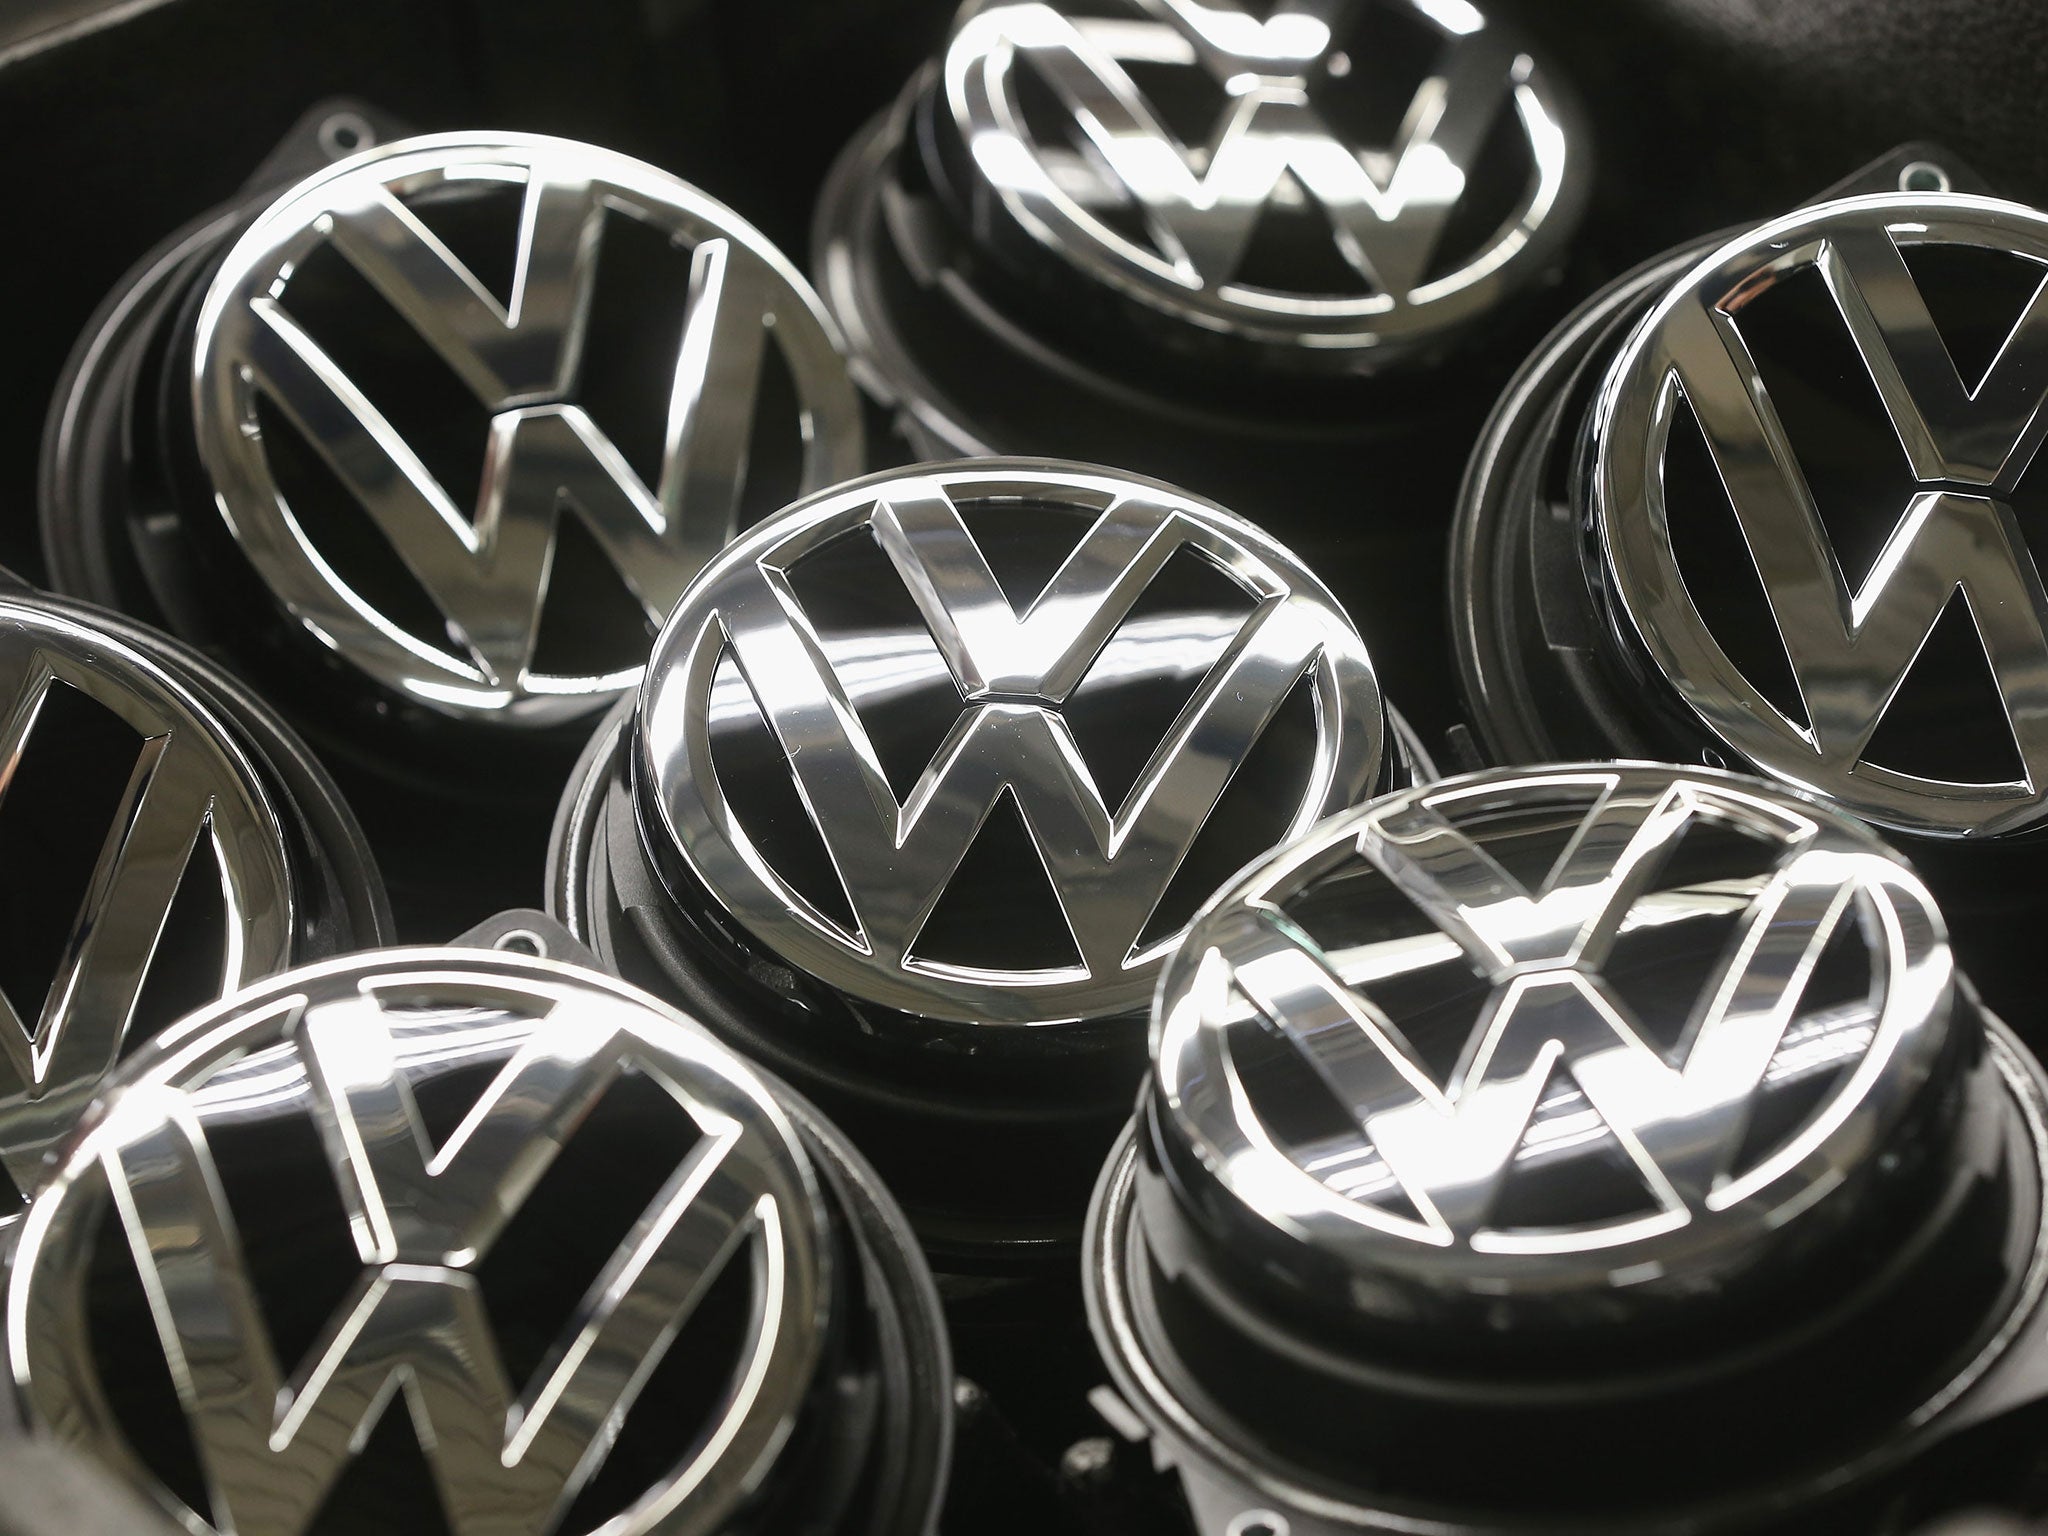 Volkswagen trunk ornaments bearing the VW logo lie next to the Golf VII assemly line at the Volkswagen factory on February 25, 2013 in Wolfsburg, Germany.